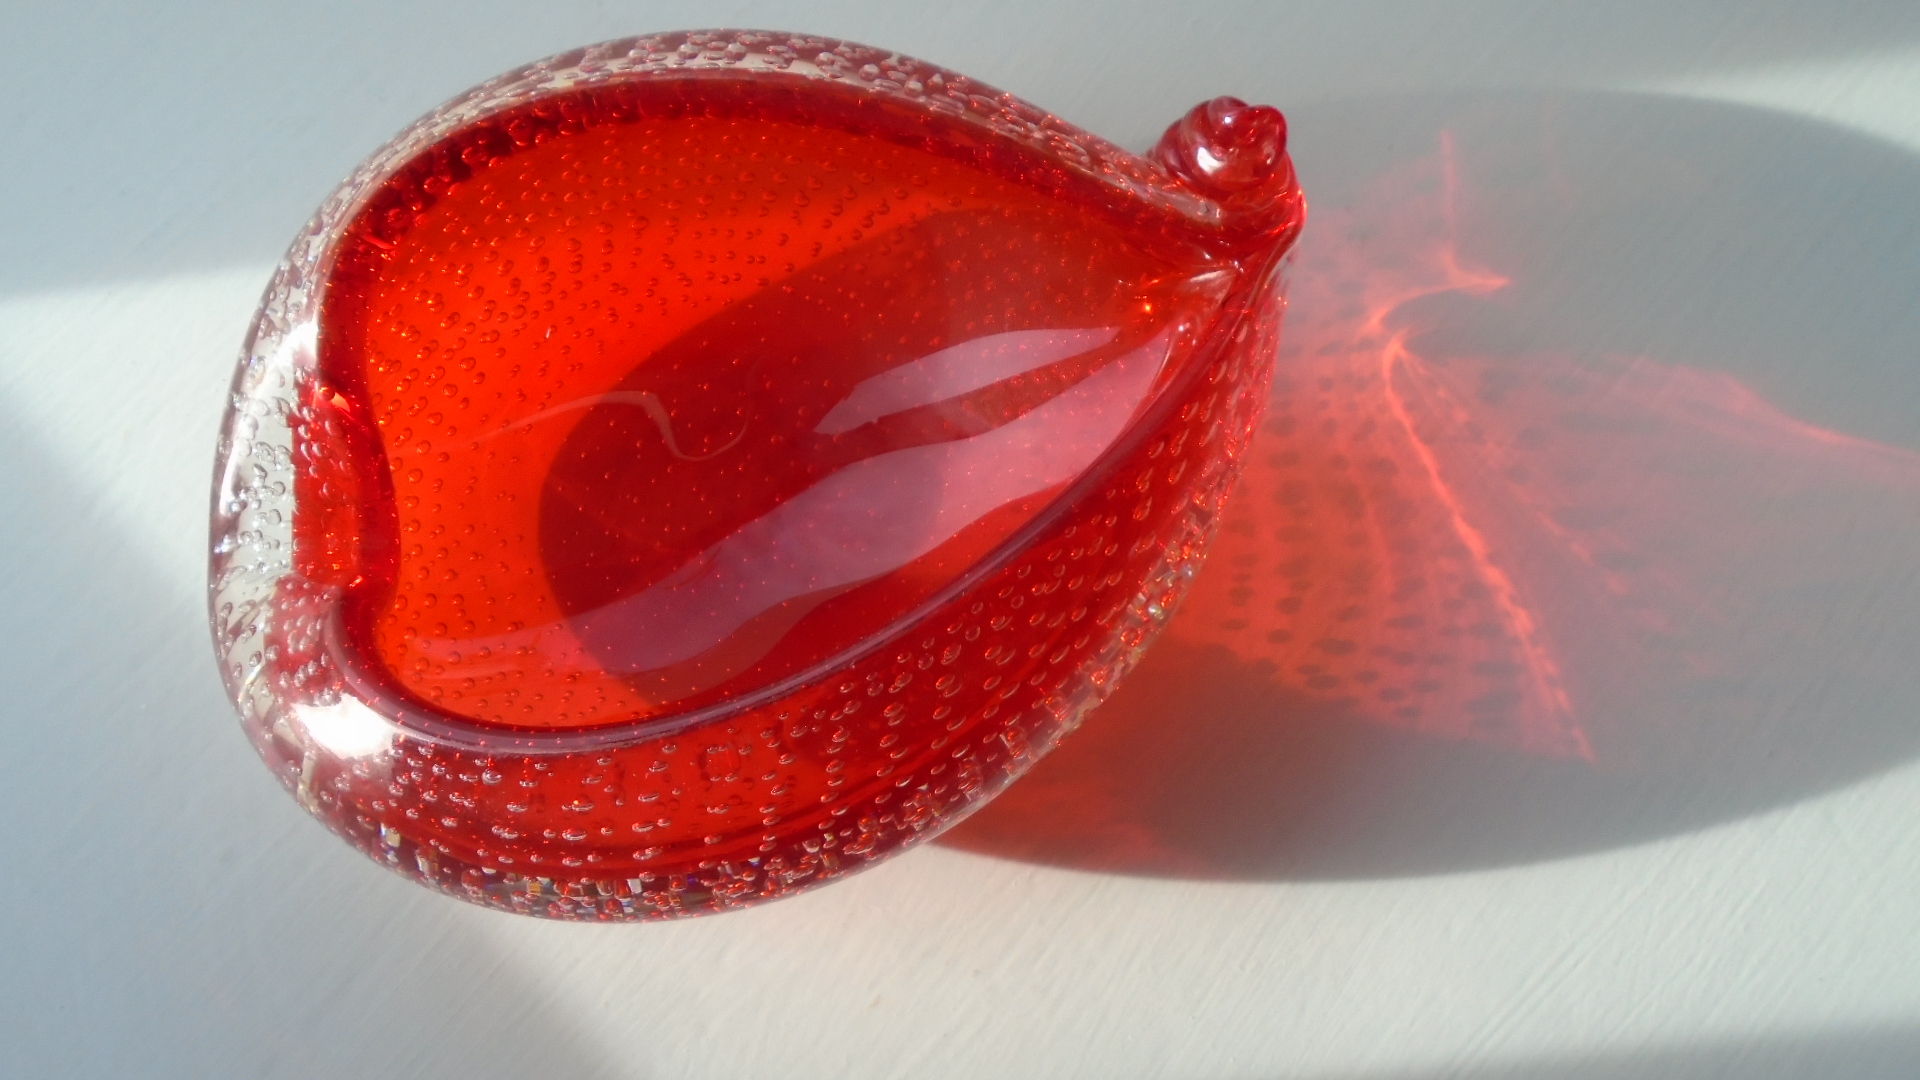 Vintage 60s MURANO Red Bullicante Glass Bowl Attributed to Archimedes Seguso